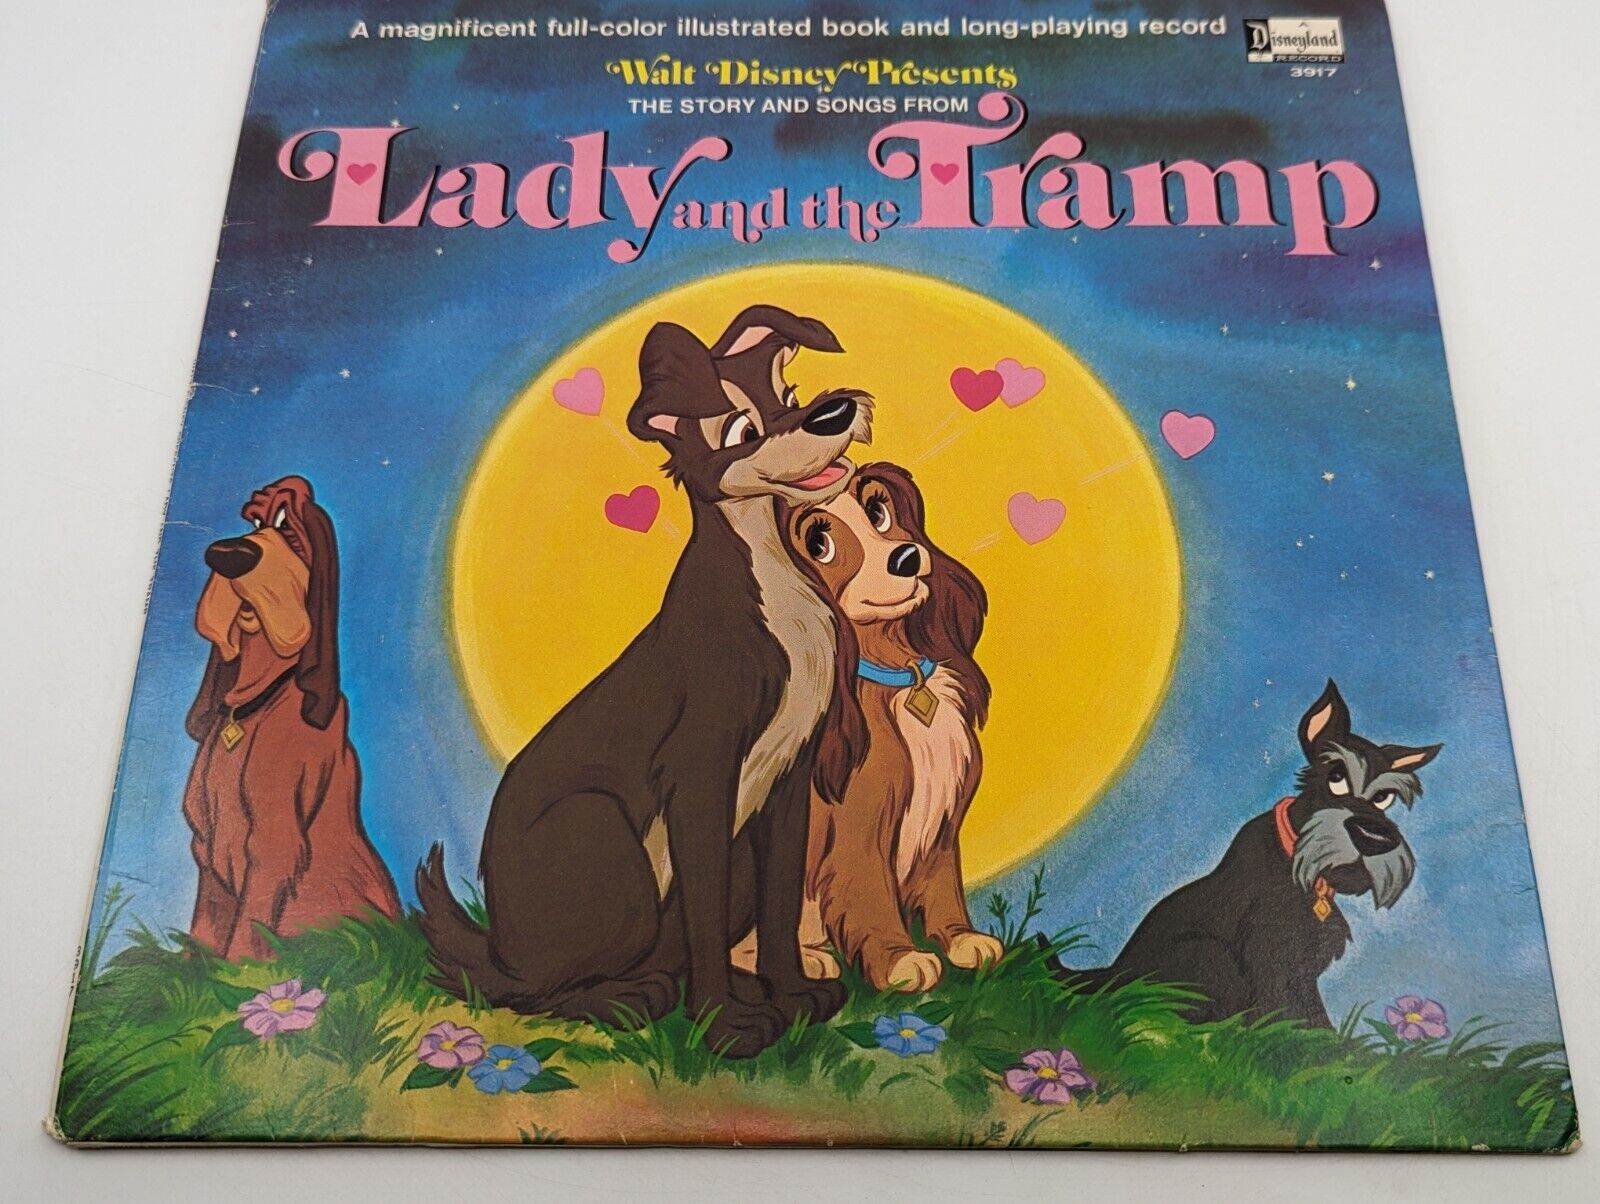 Lady and the Tramp 3917 Disney 3917